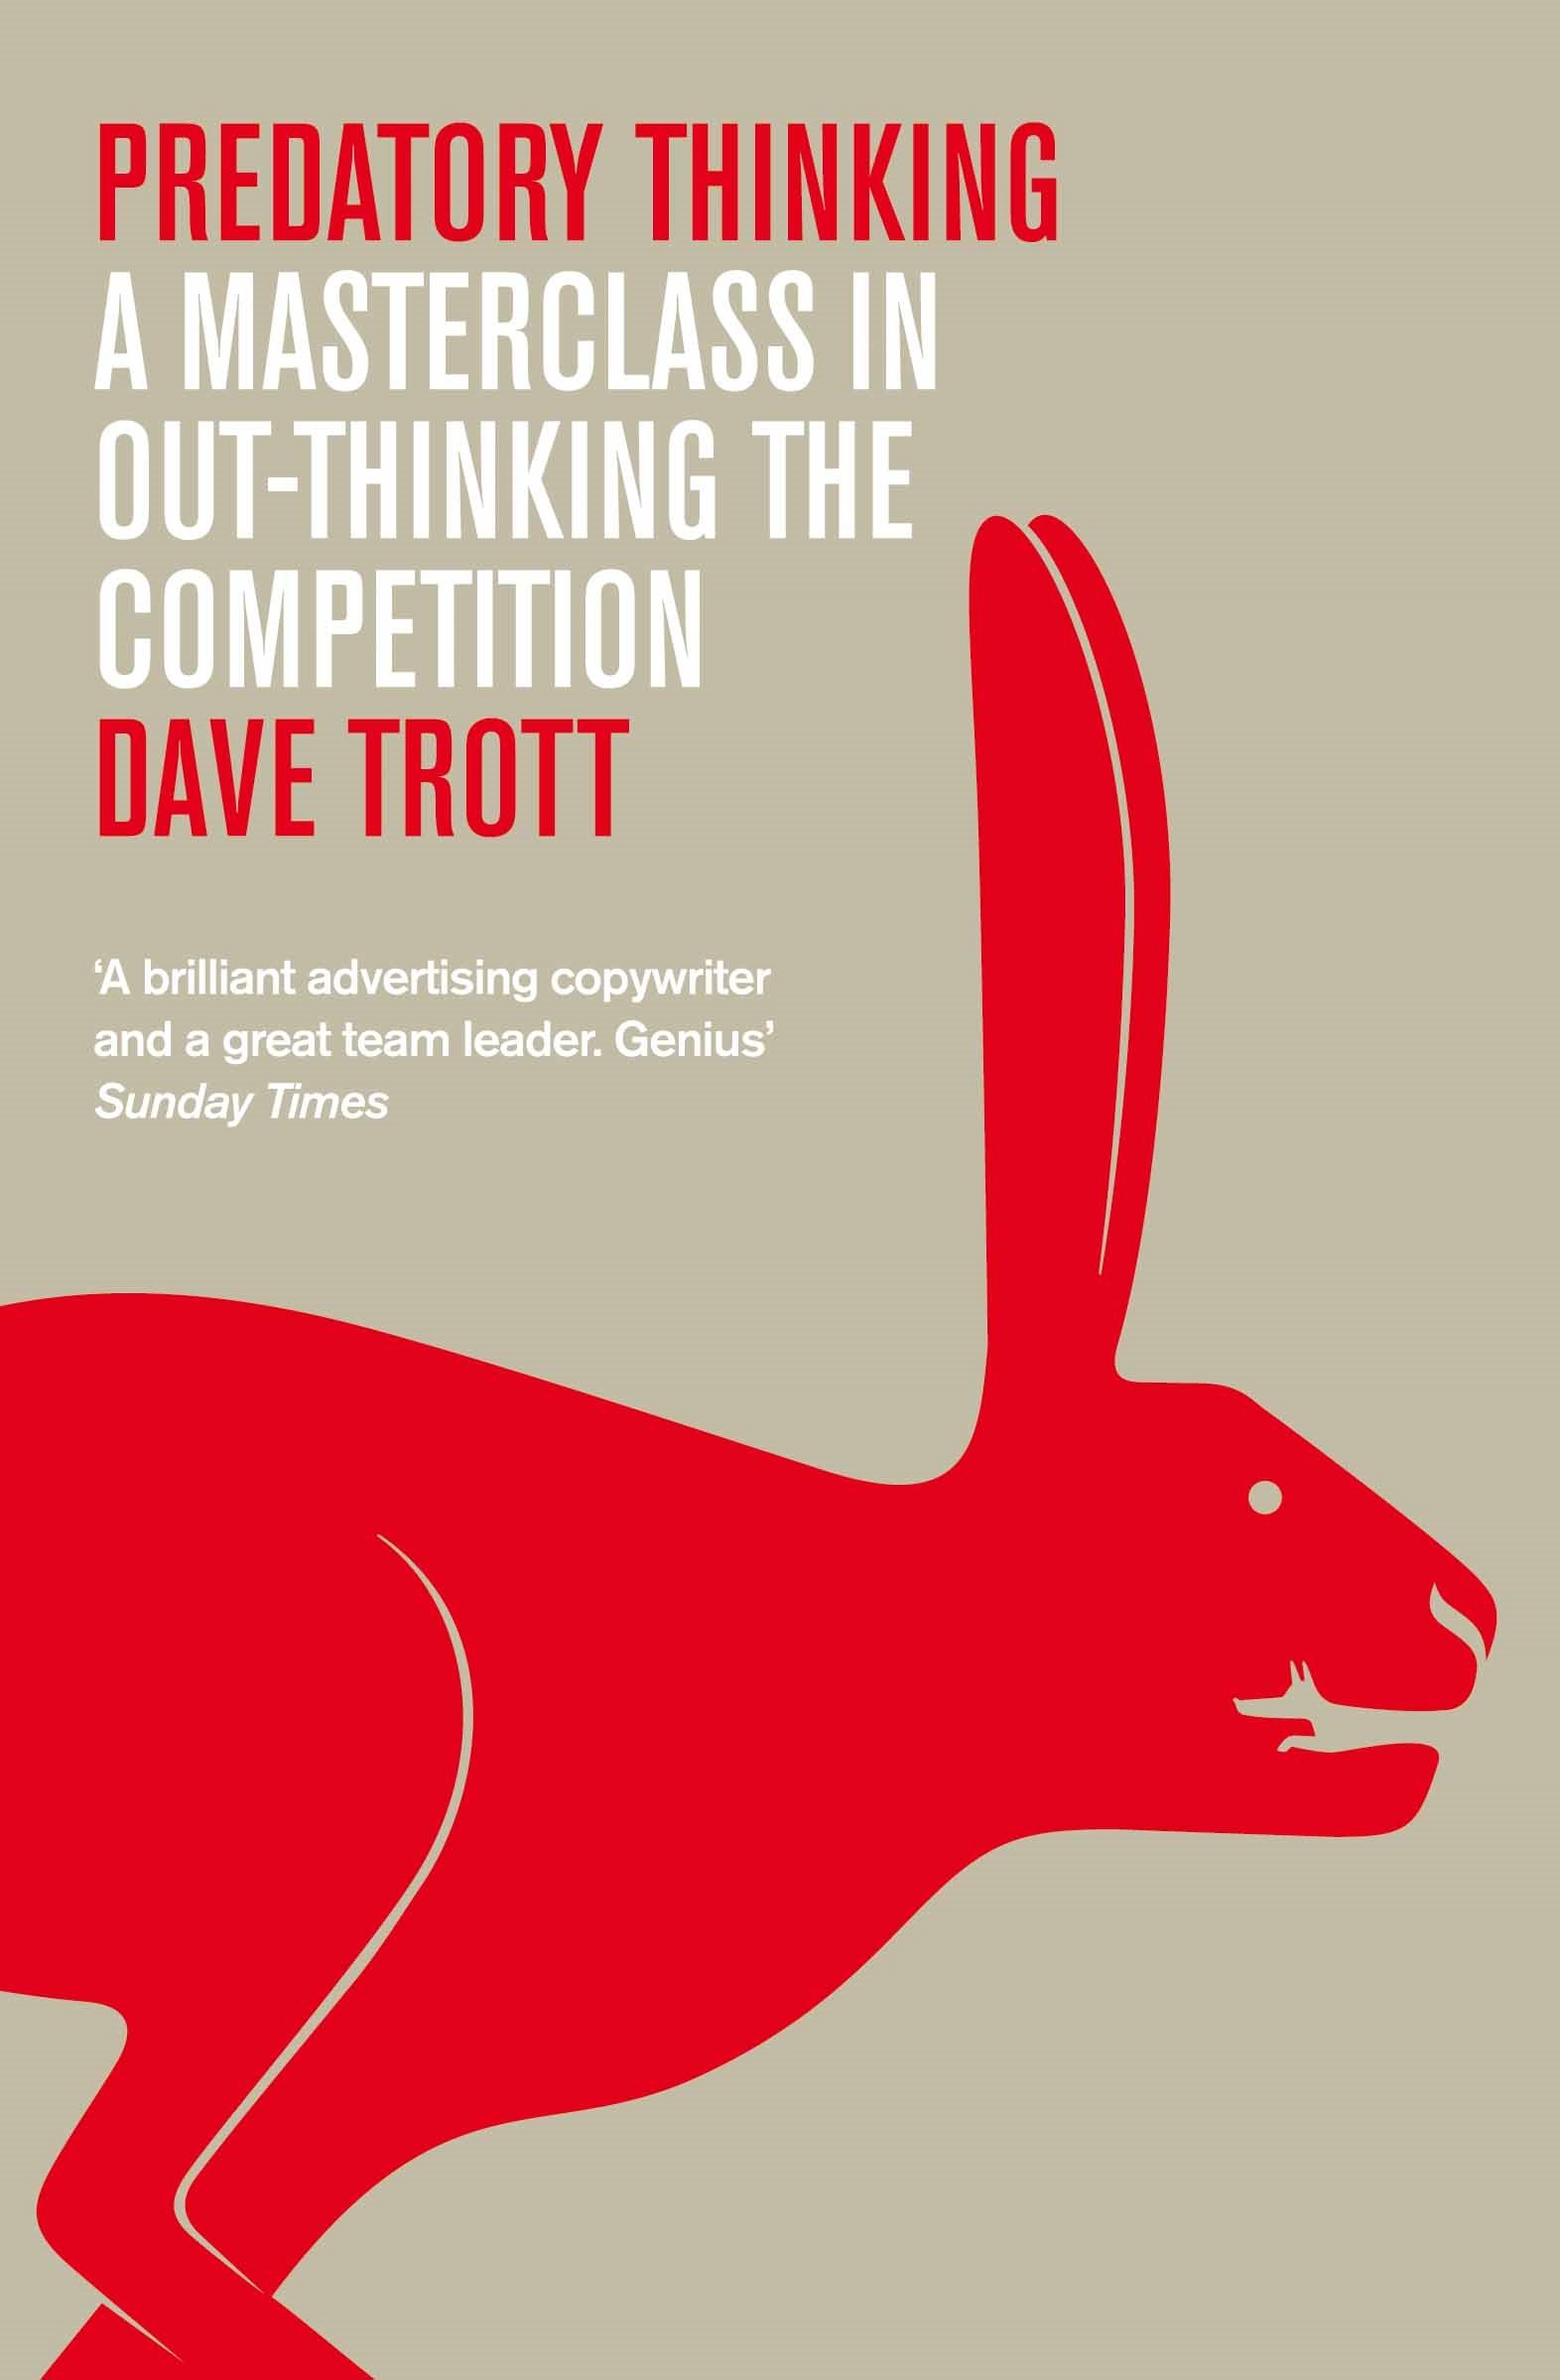 Dave Trott, A Curate's Egg